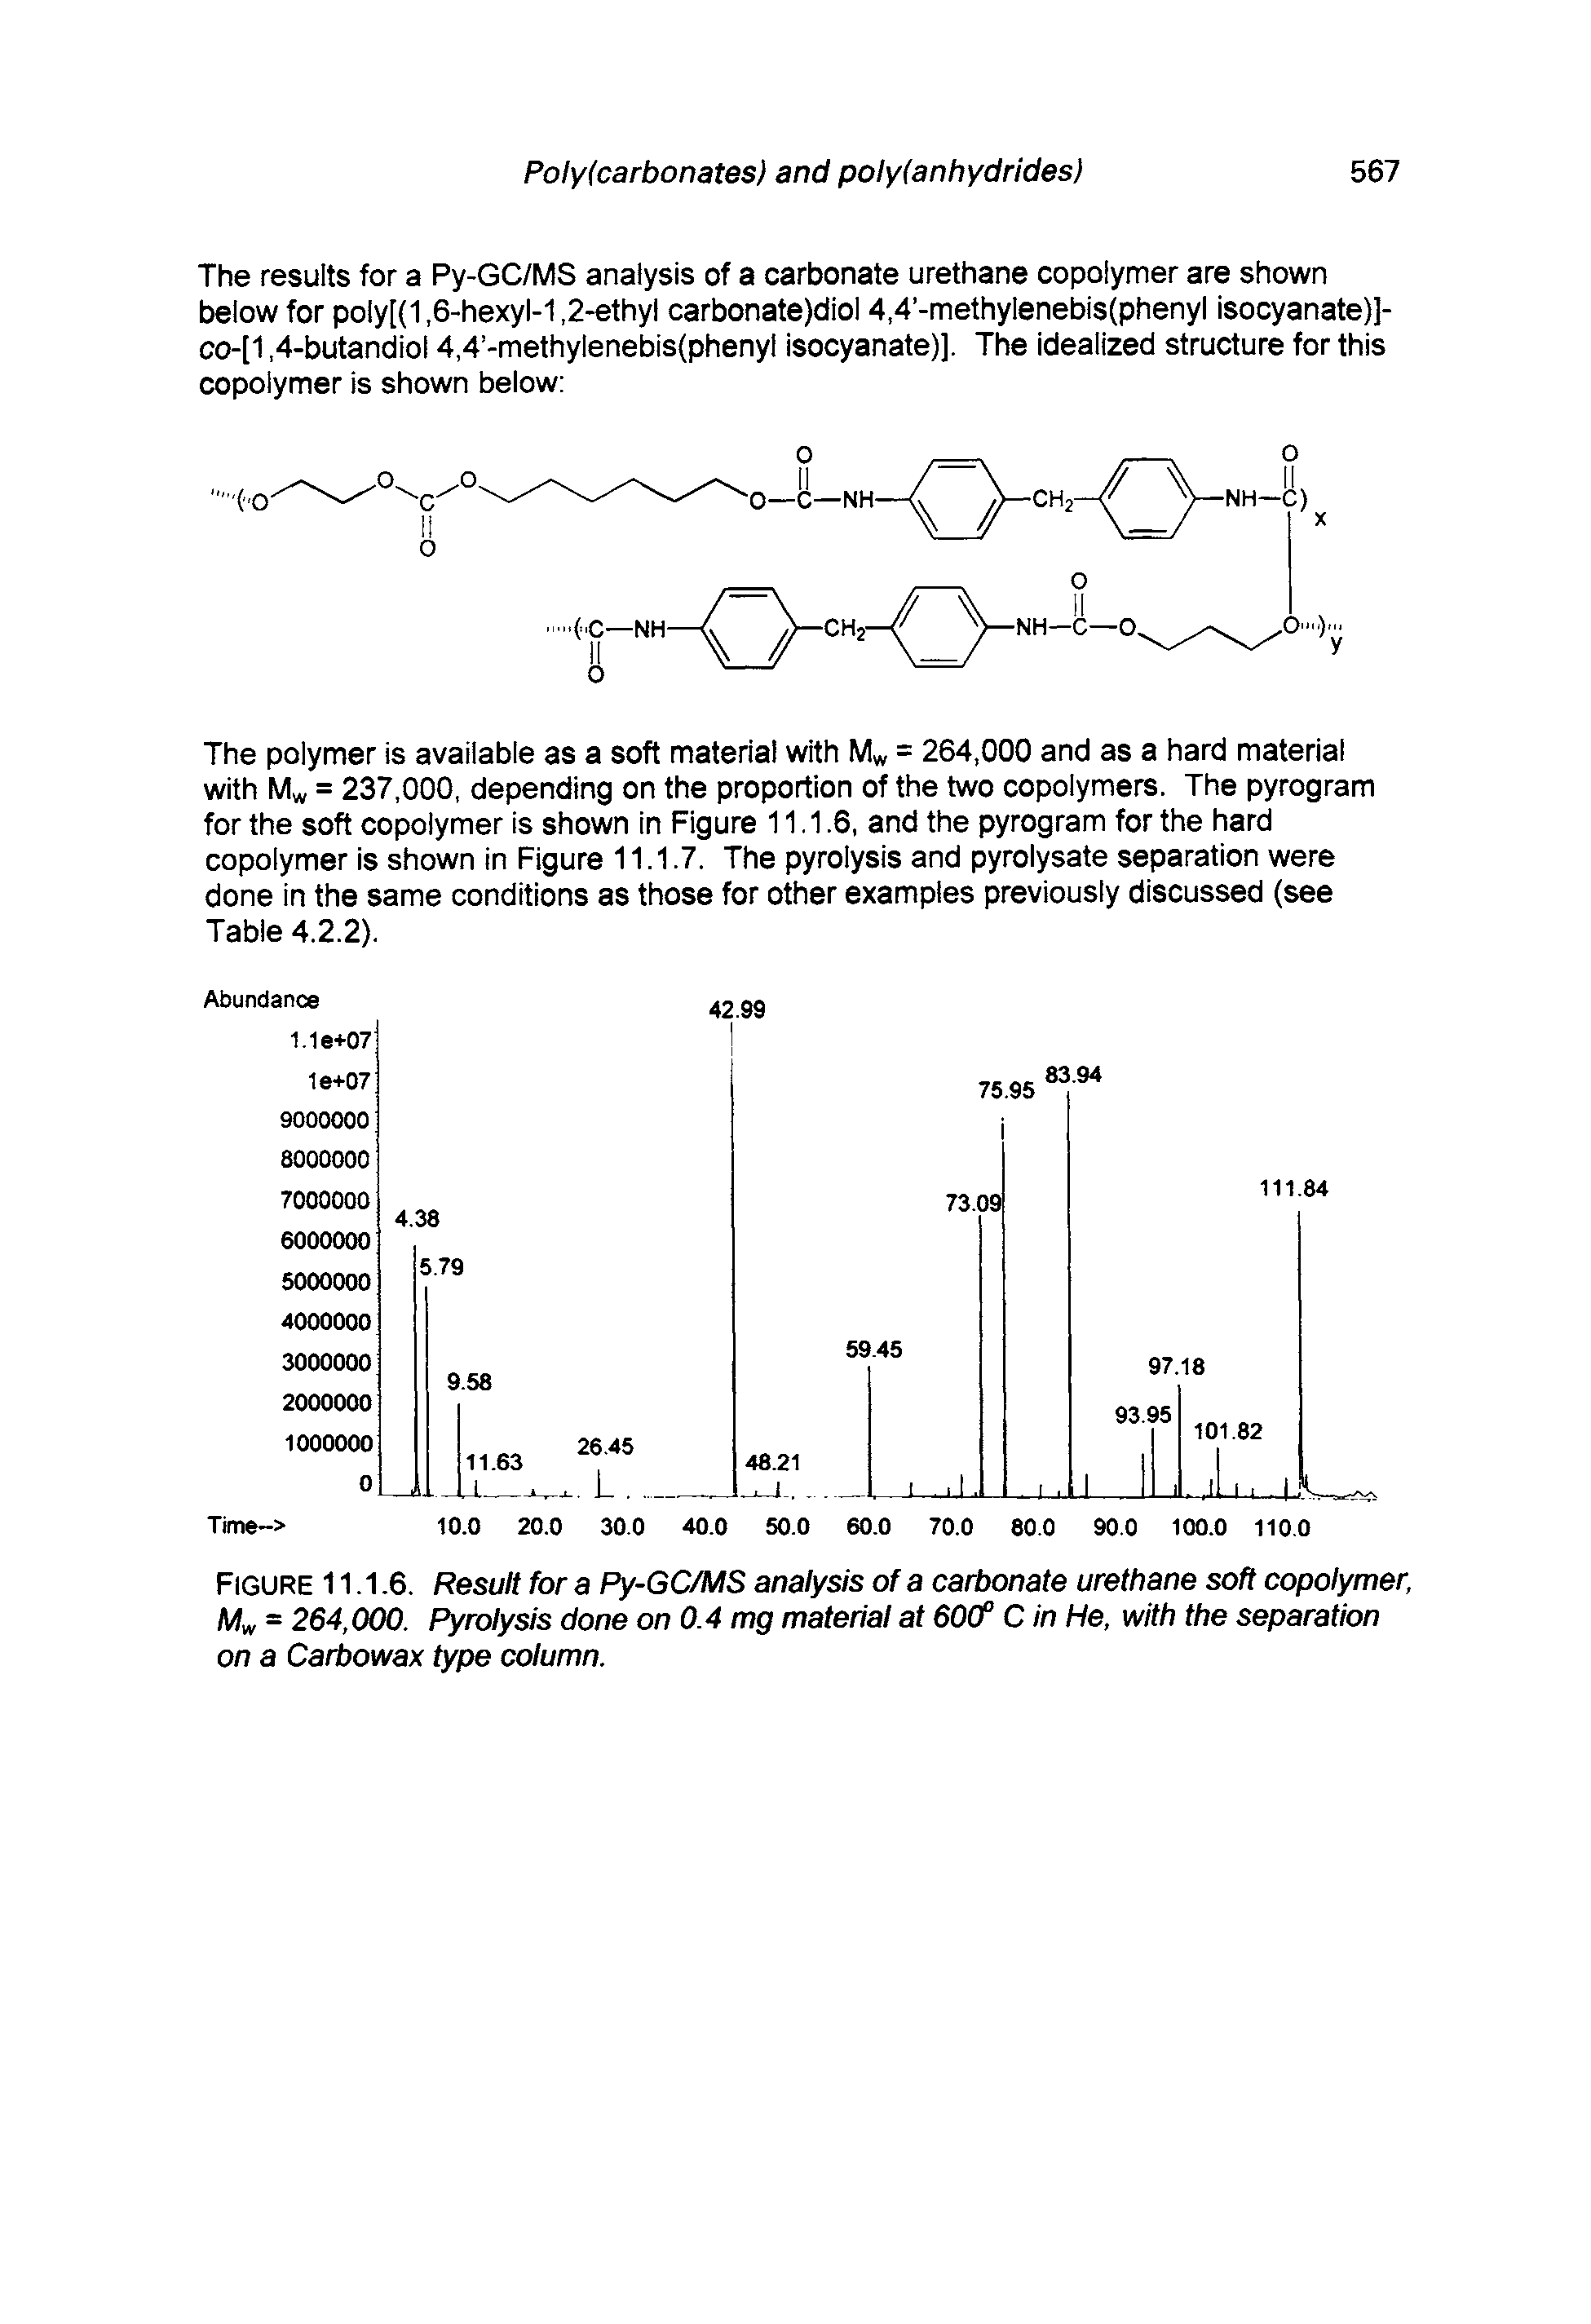 Figure 11.1.6. Result for a Py-GC/MS analysis of a carbonate urethane soft copolymer, M = 264,000. Pyrolysis done on 0.4 mg material at 600° C in He, with the separation on a Carbowax type column.